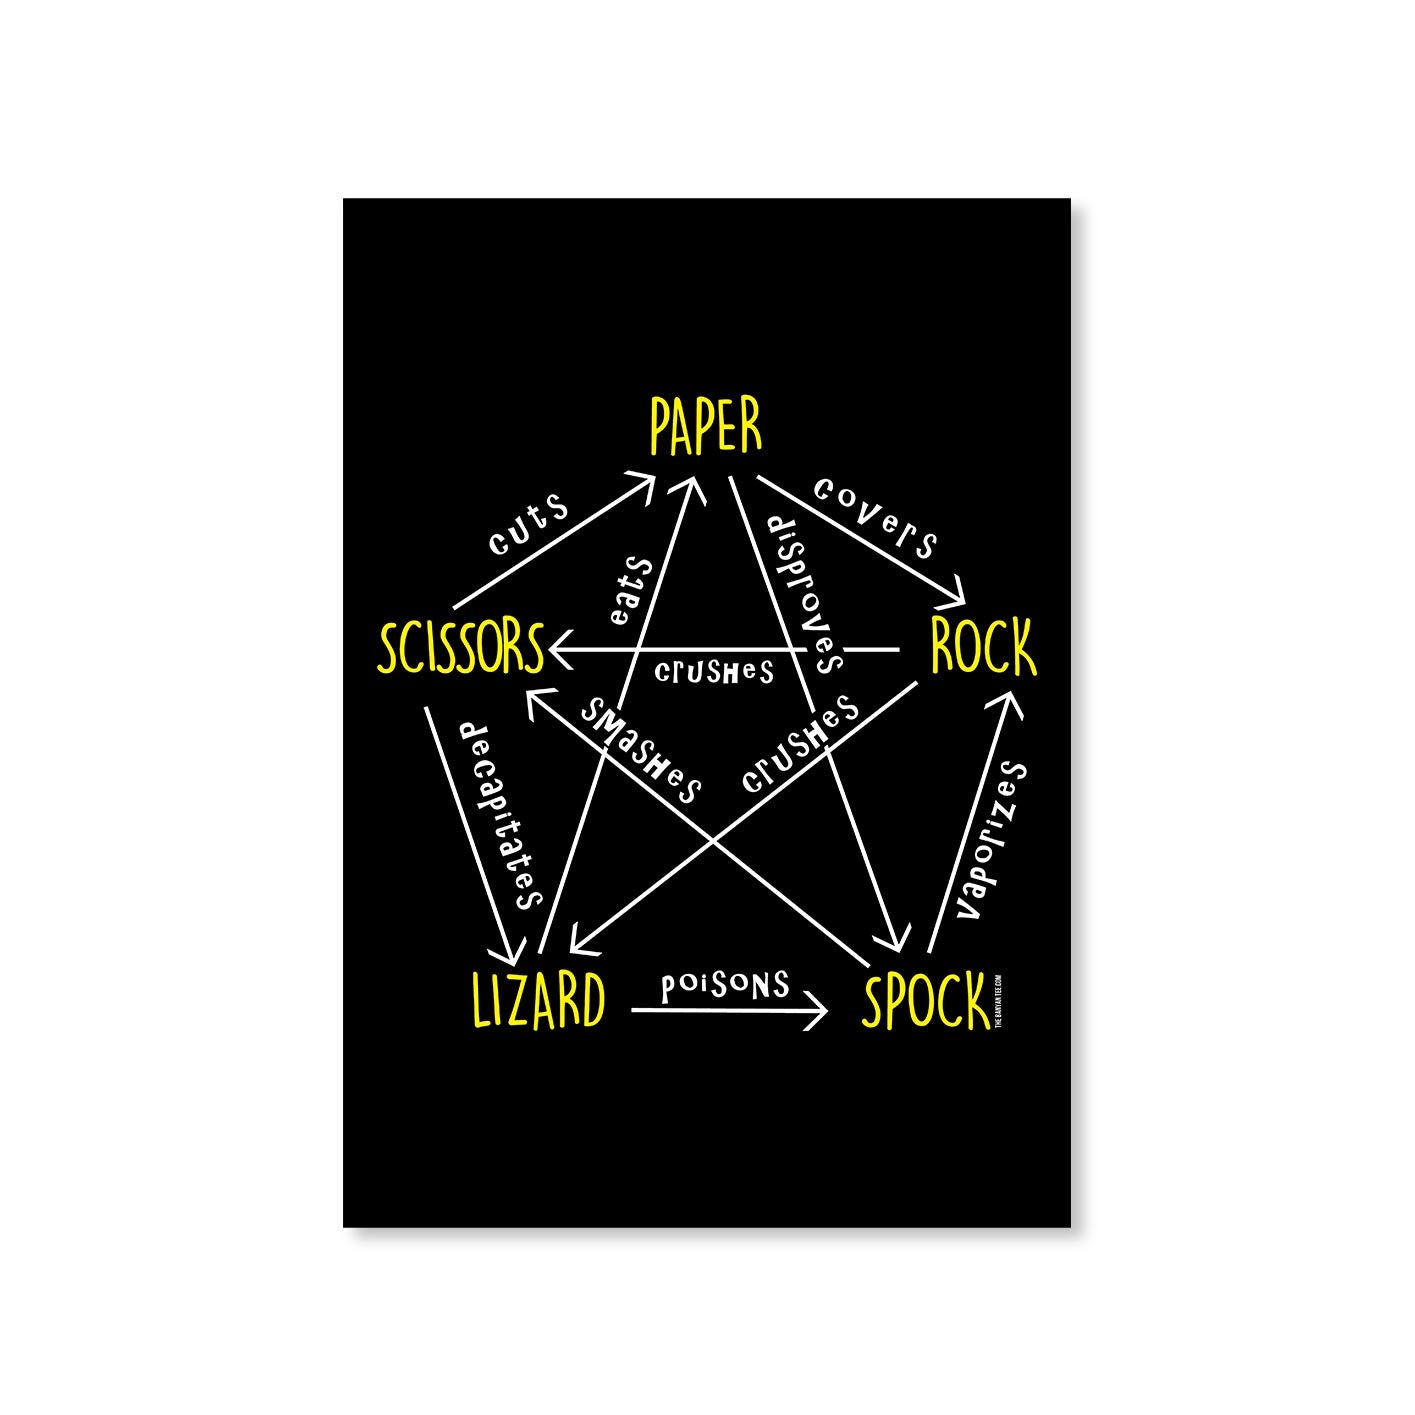 The Big Bang Theory Poster - Rock Paper Scissors The Banyan Tee TBT